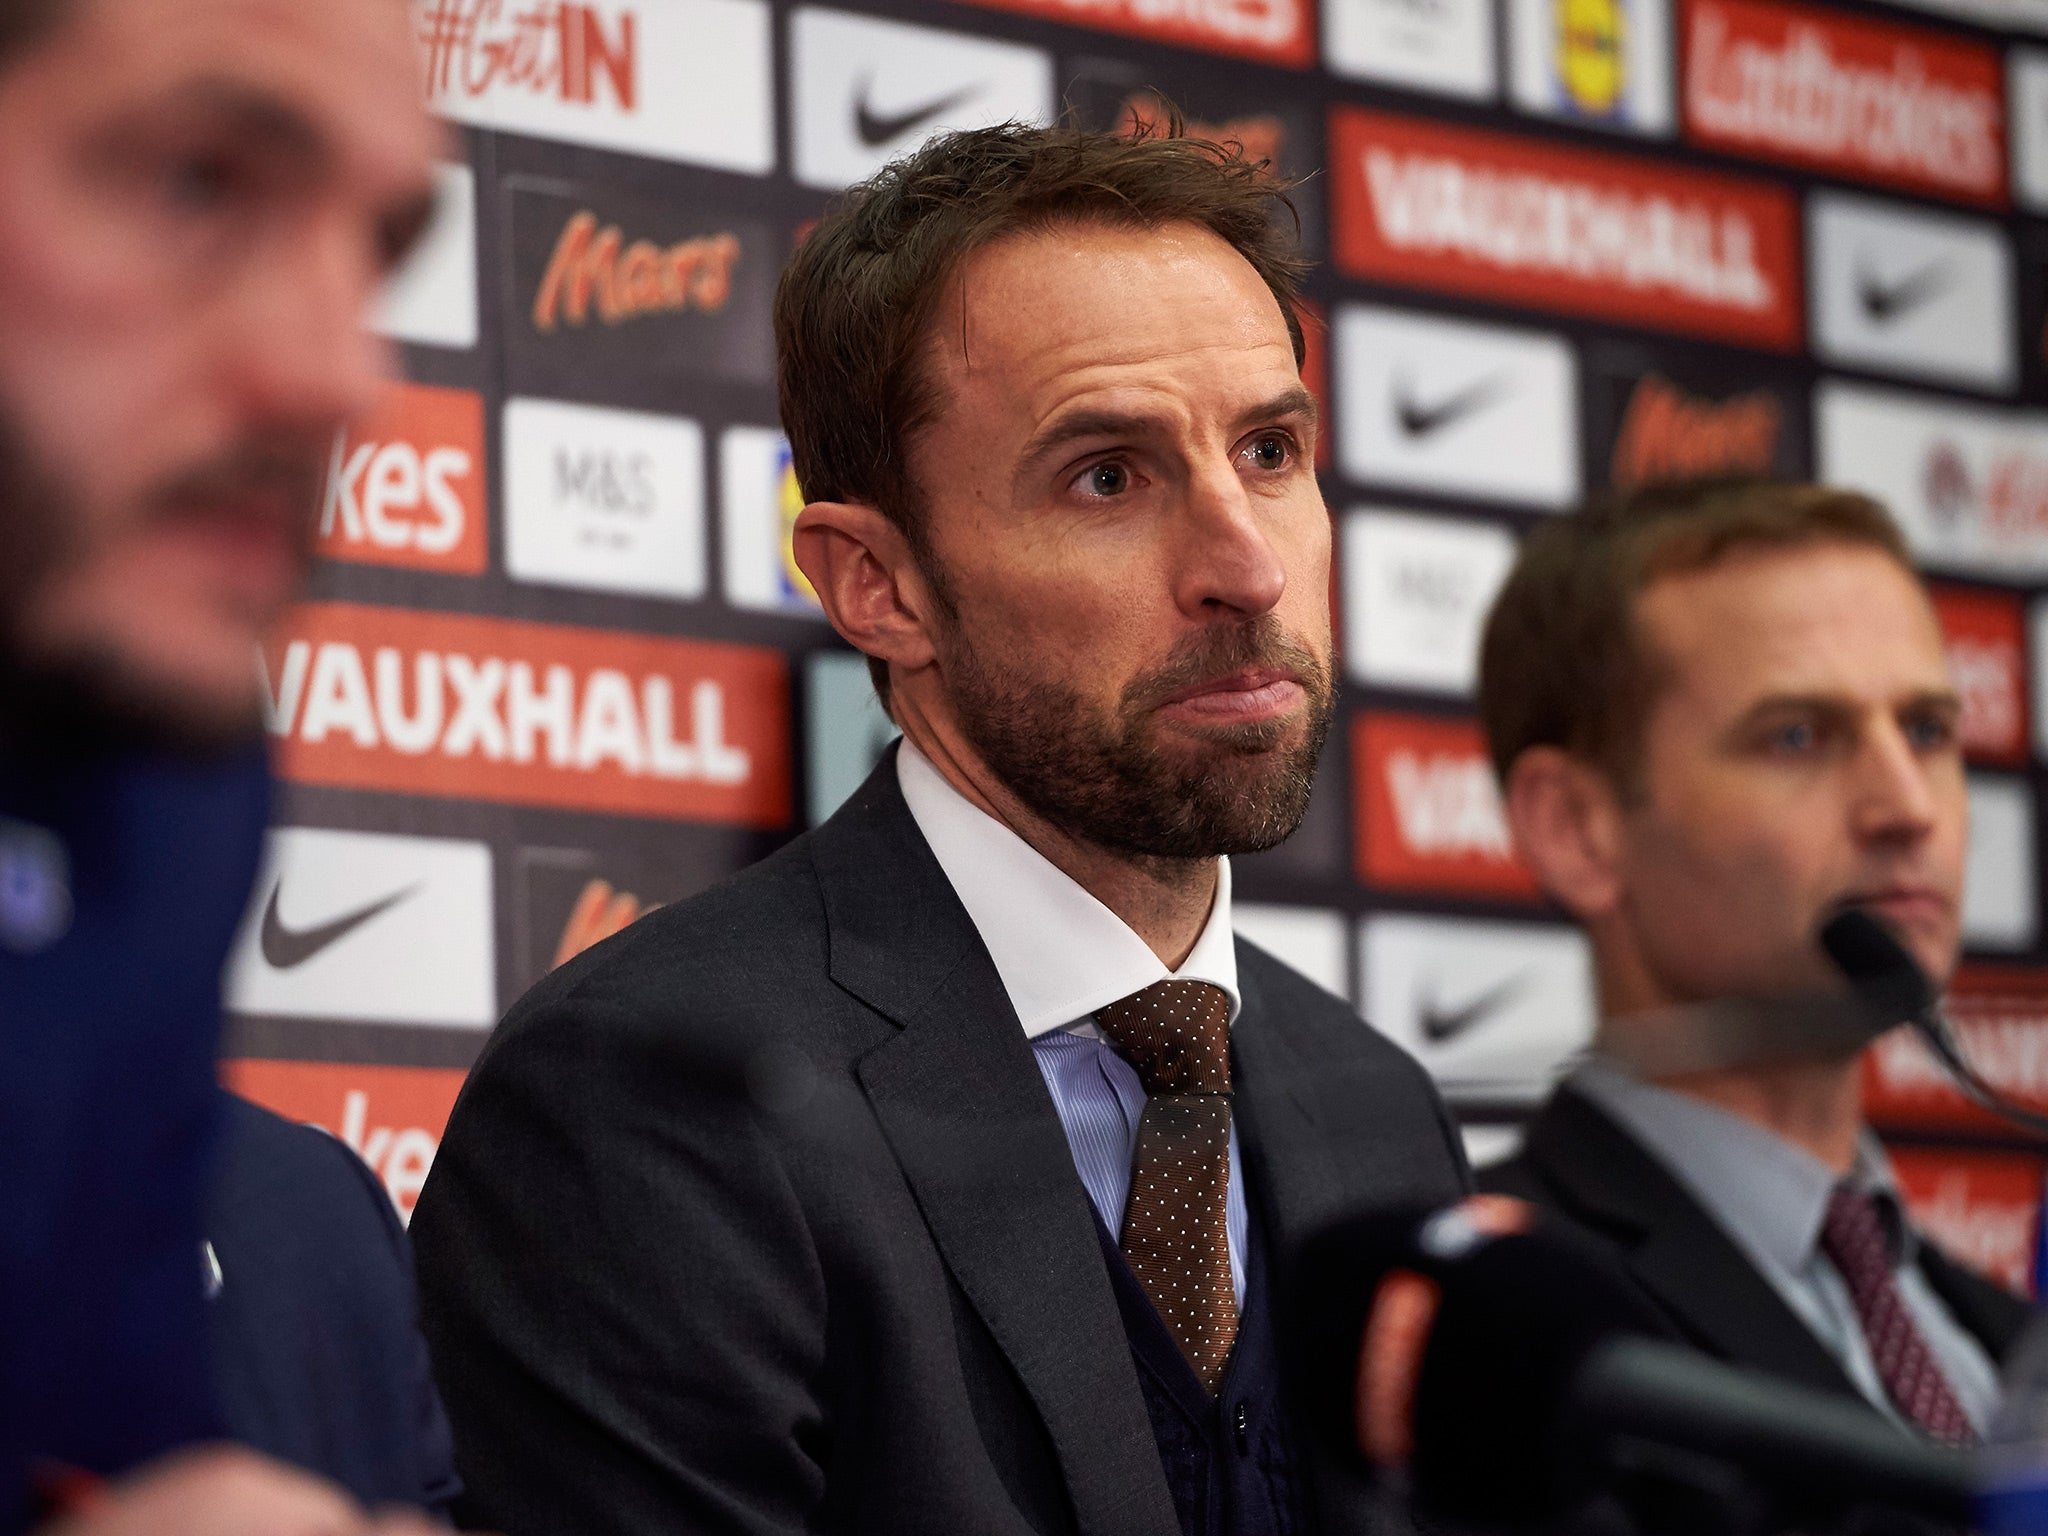 Southgate revealed he was a teammate of one of the abuse victims